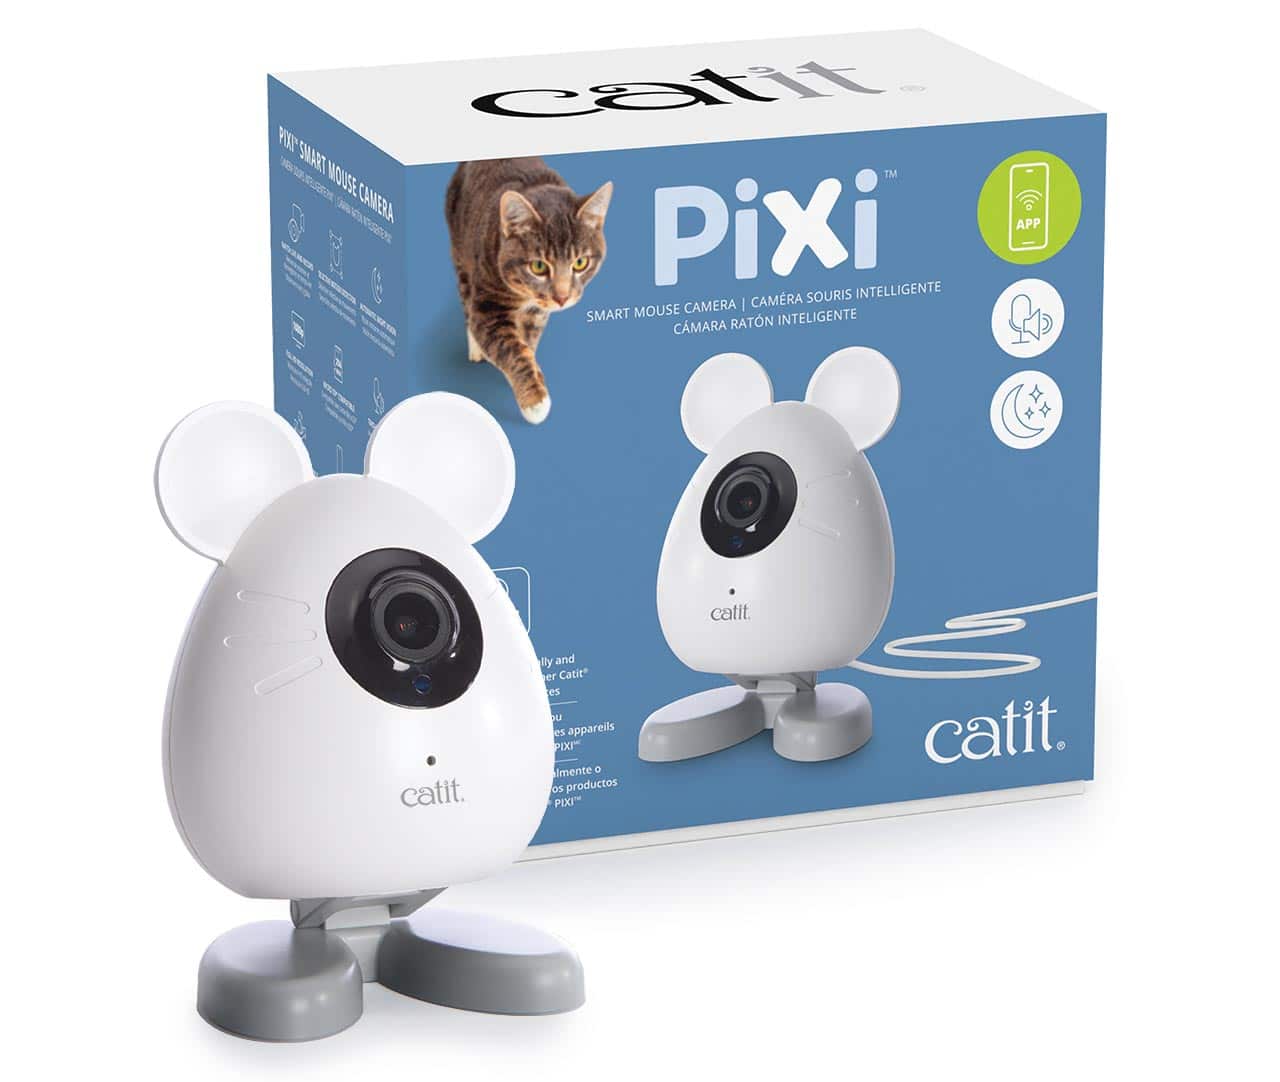 Catit PIXI Smart Mouse Camera packaging